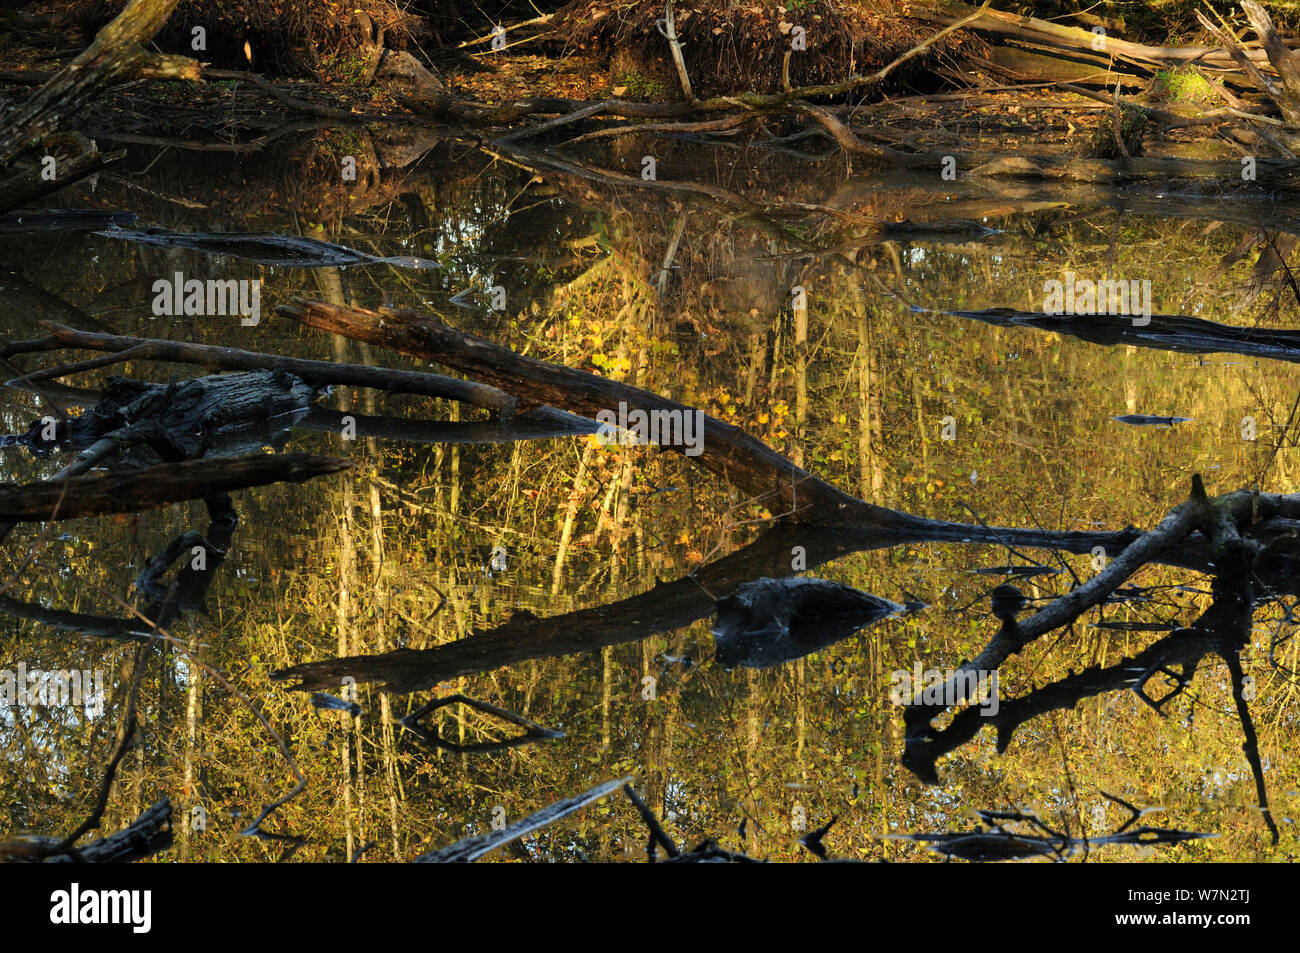 Reflections of Grey willow (Salix cinerea) and Alder (Alnus glutinosa) trees, with exposed dead wood in a glacial kettle hole pond, Herefordshire, England, UK, Europe, November Stock Photo